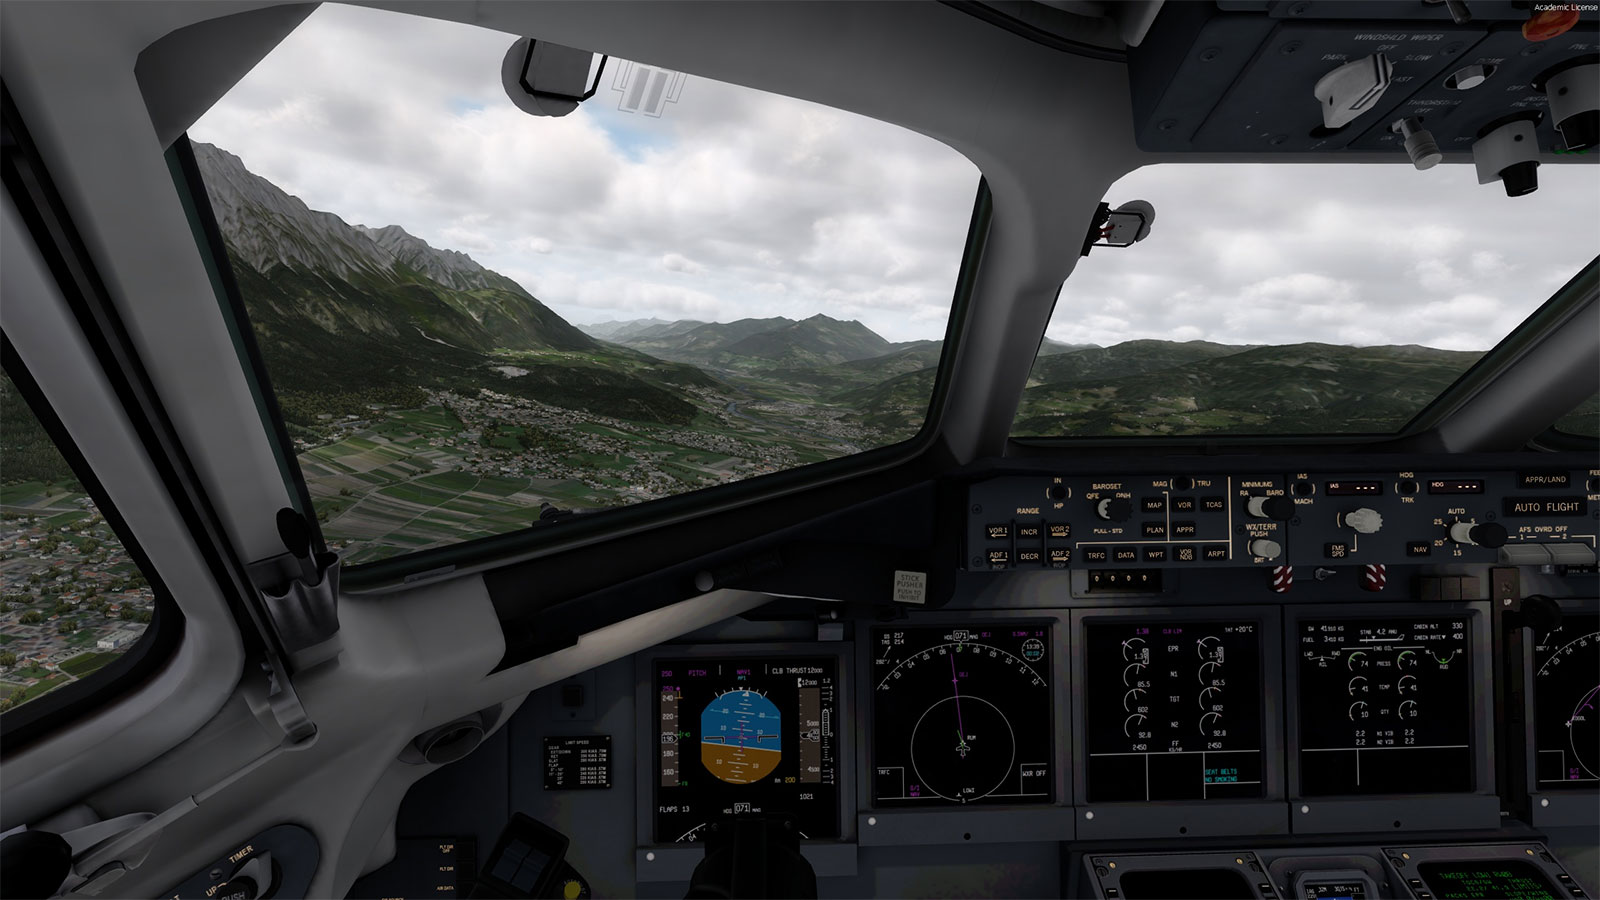 p3d/fsx fs global real weather